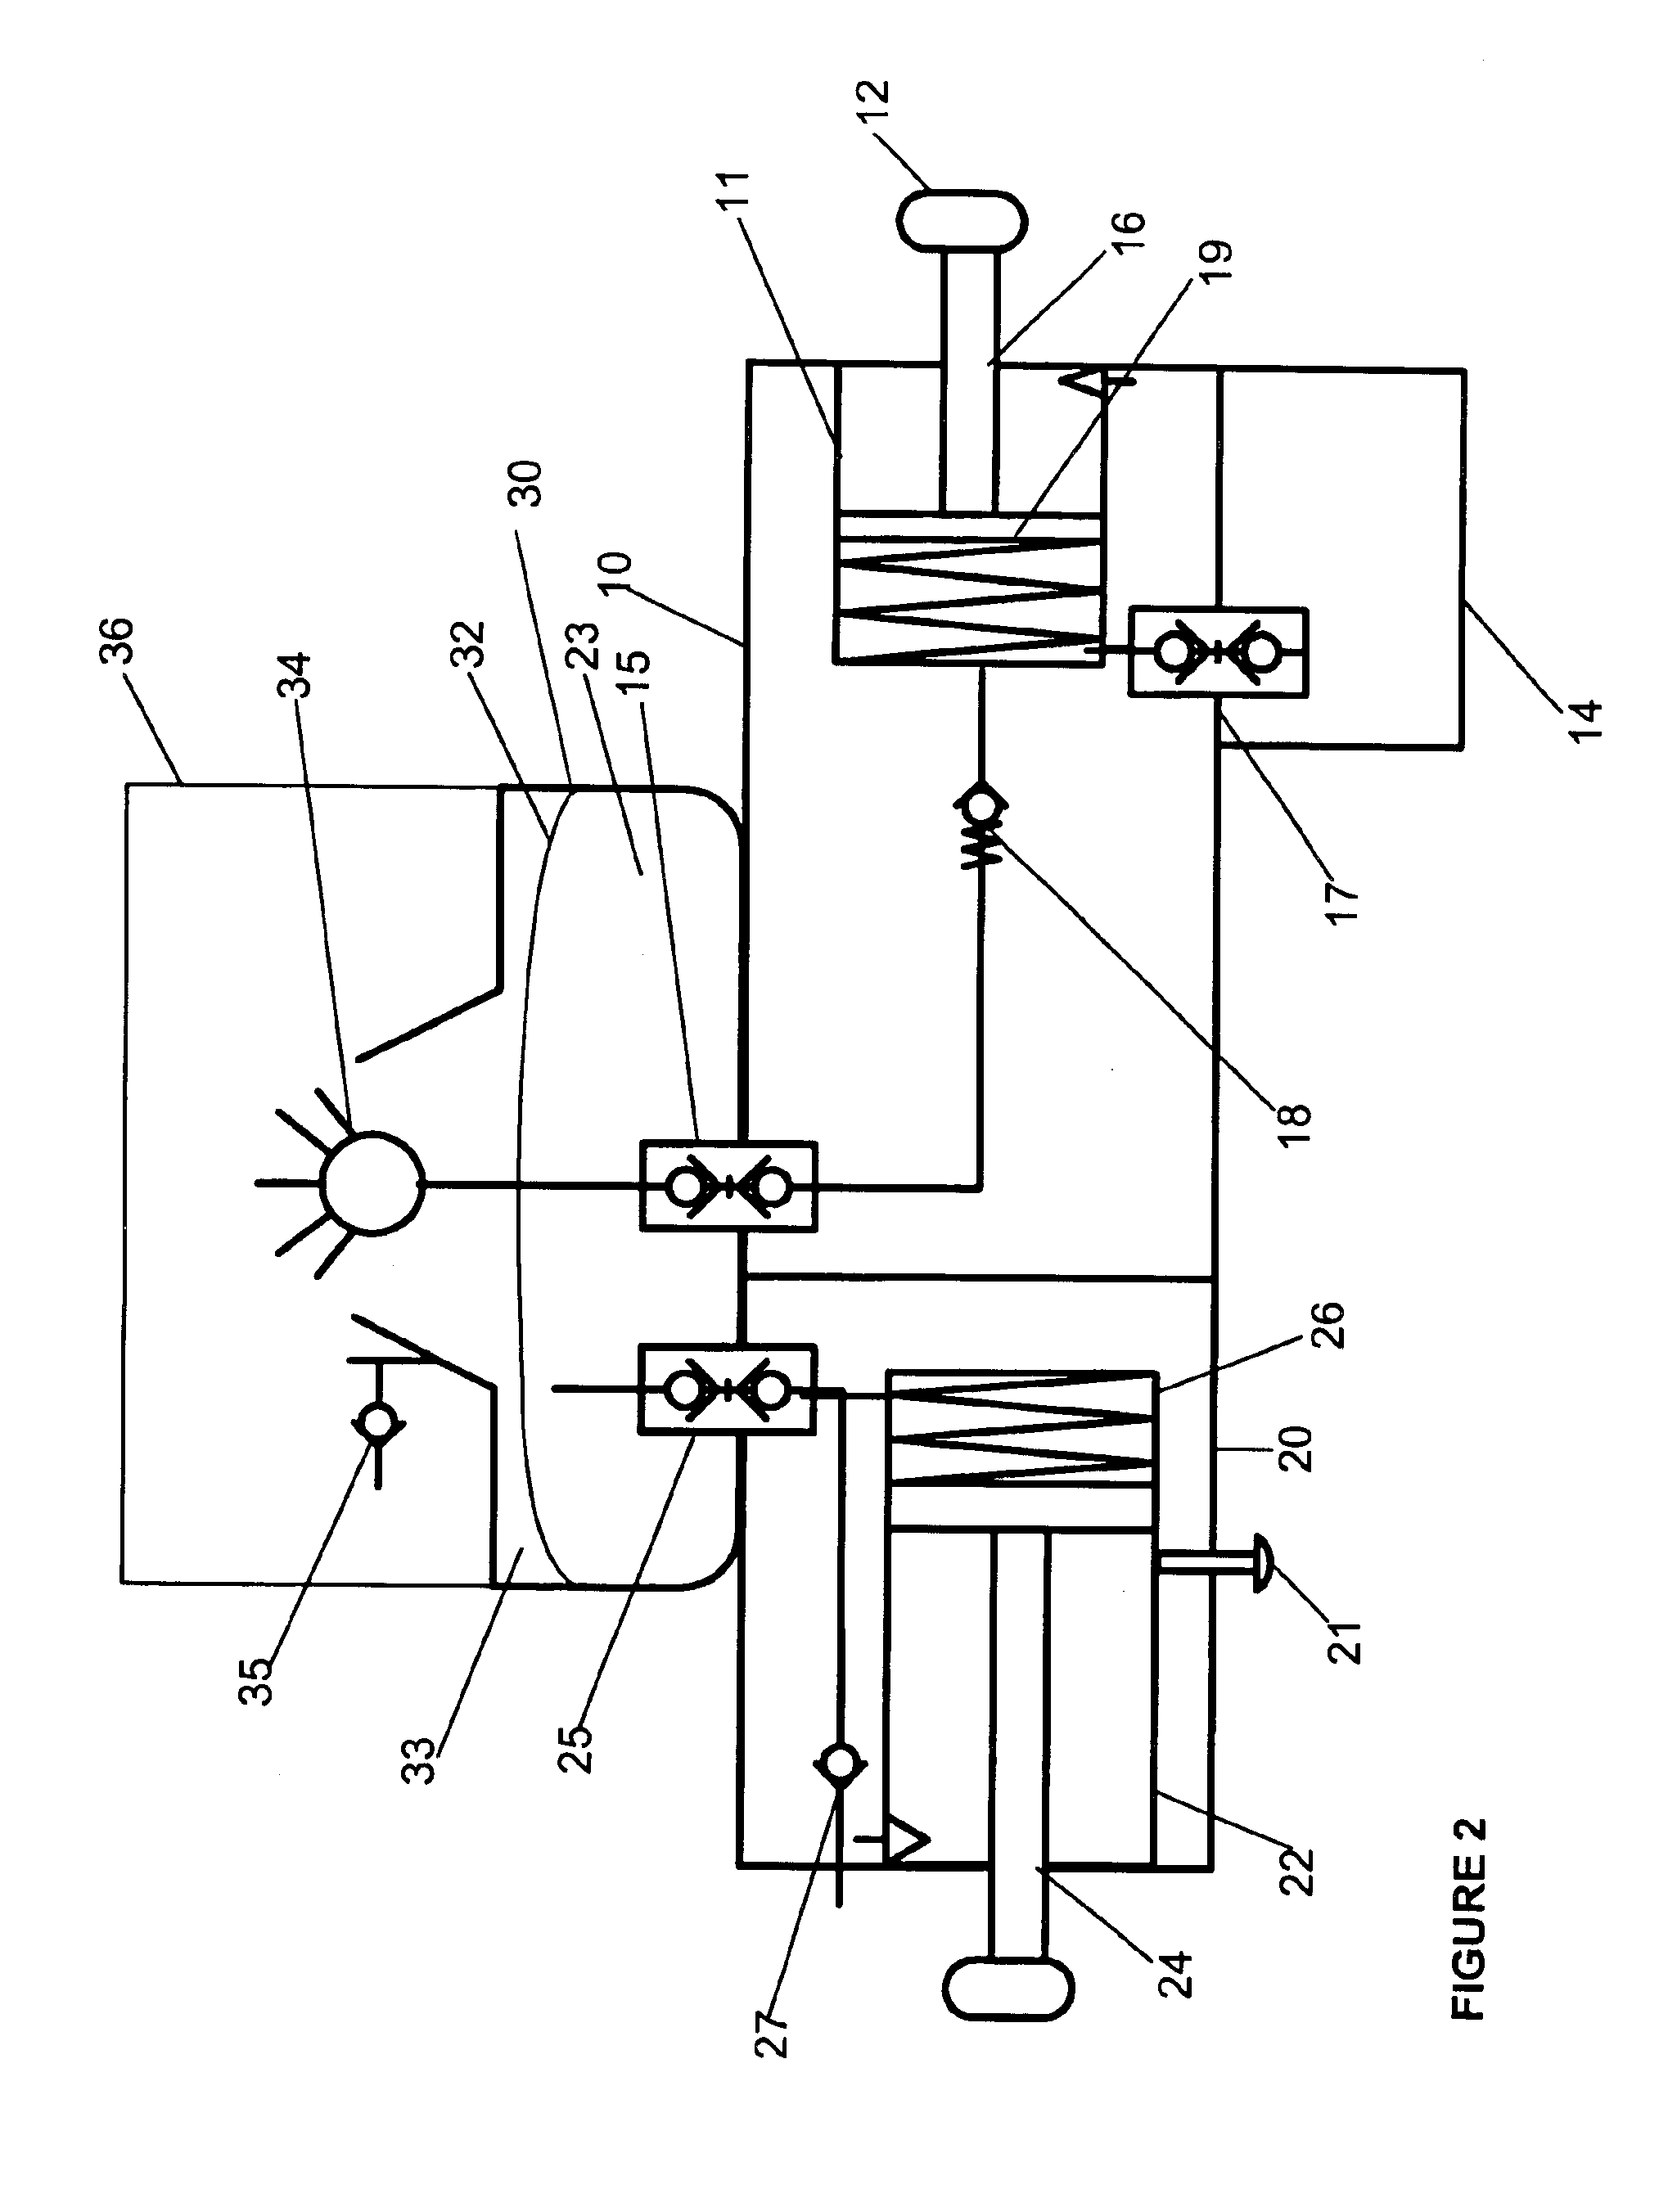 Agent delivery and aspiration device